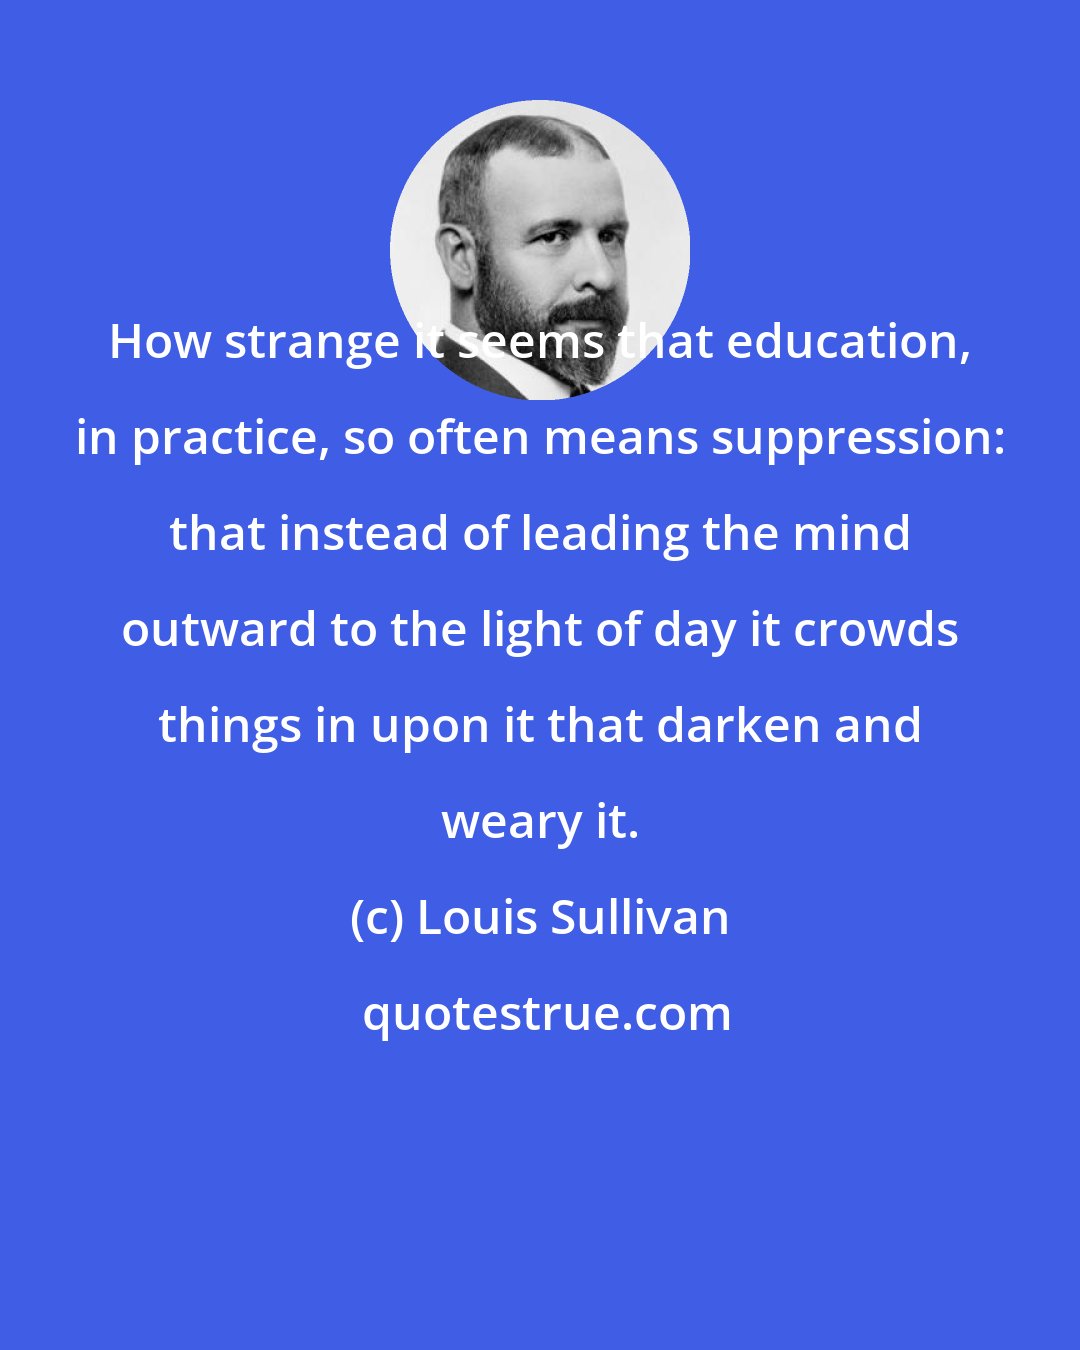 Louis Sullivan: How strange it seems that education, in practice, so often means suppression: that instead of leading the mind outward to the light of day it crowds things in upon it that darken and weary it.